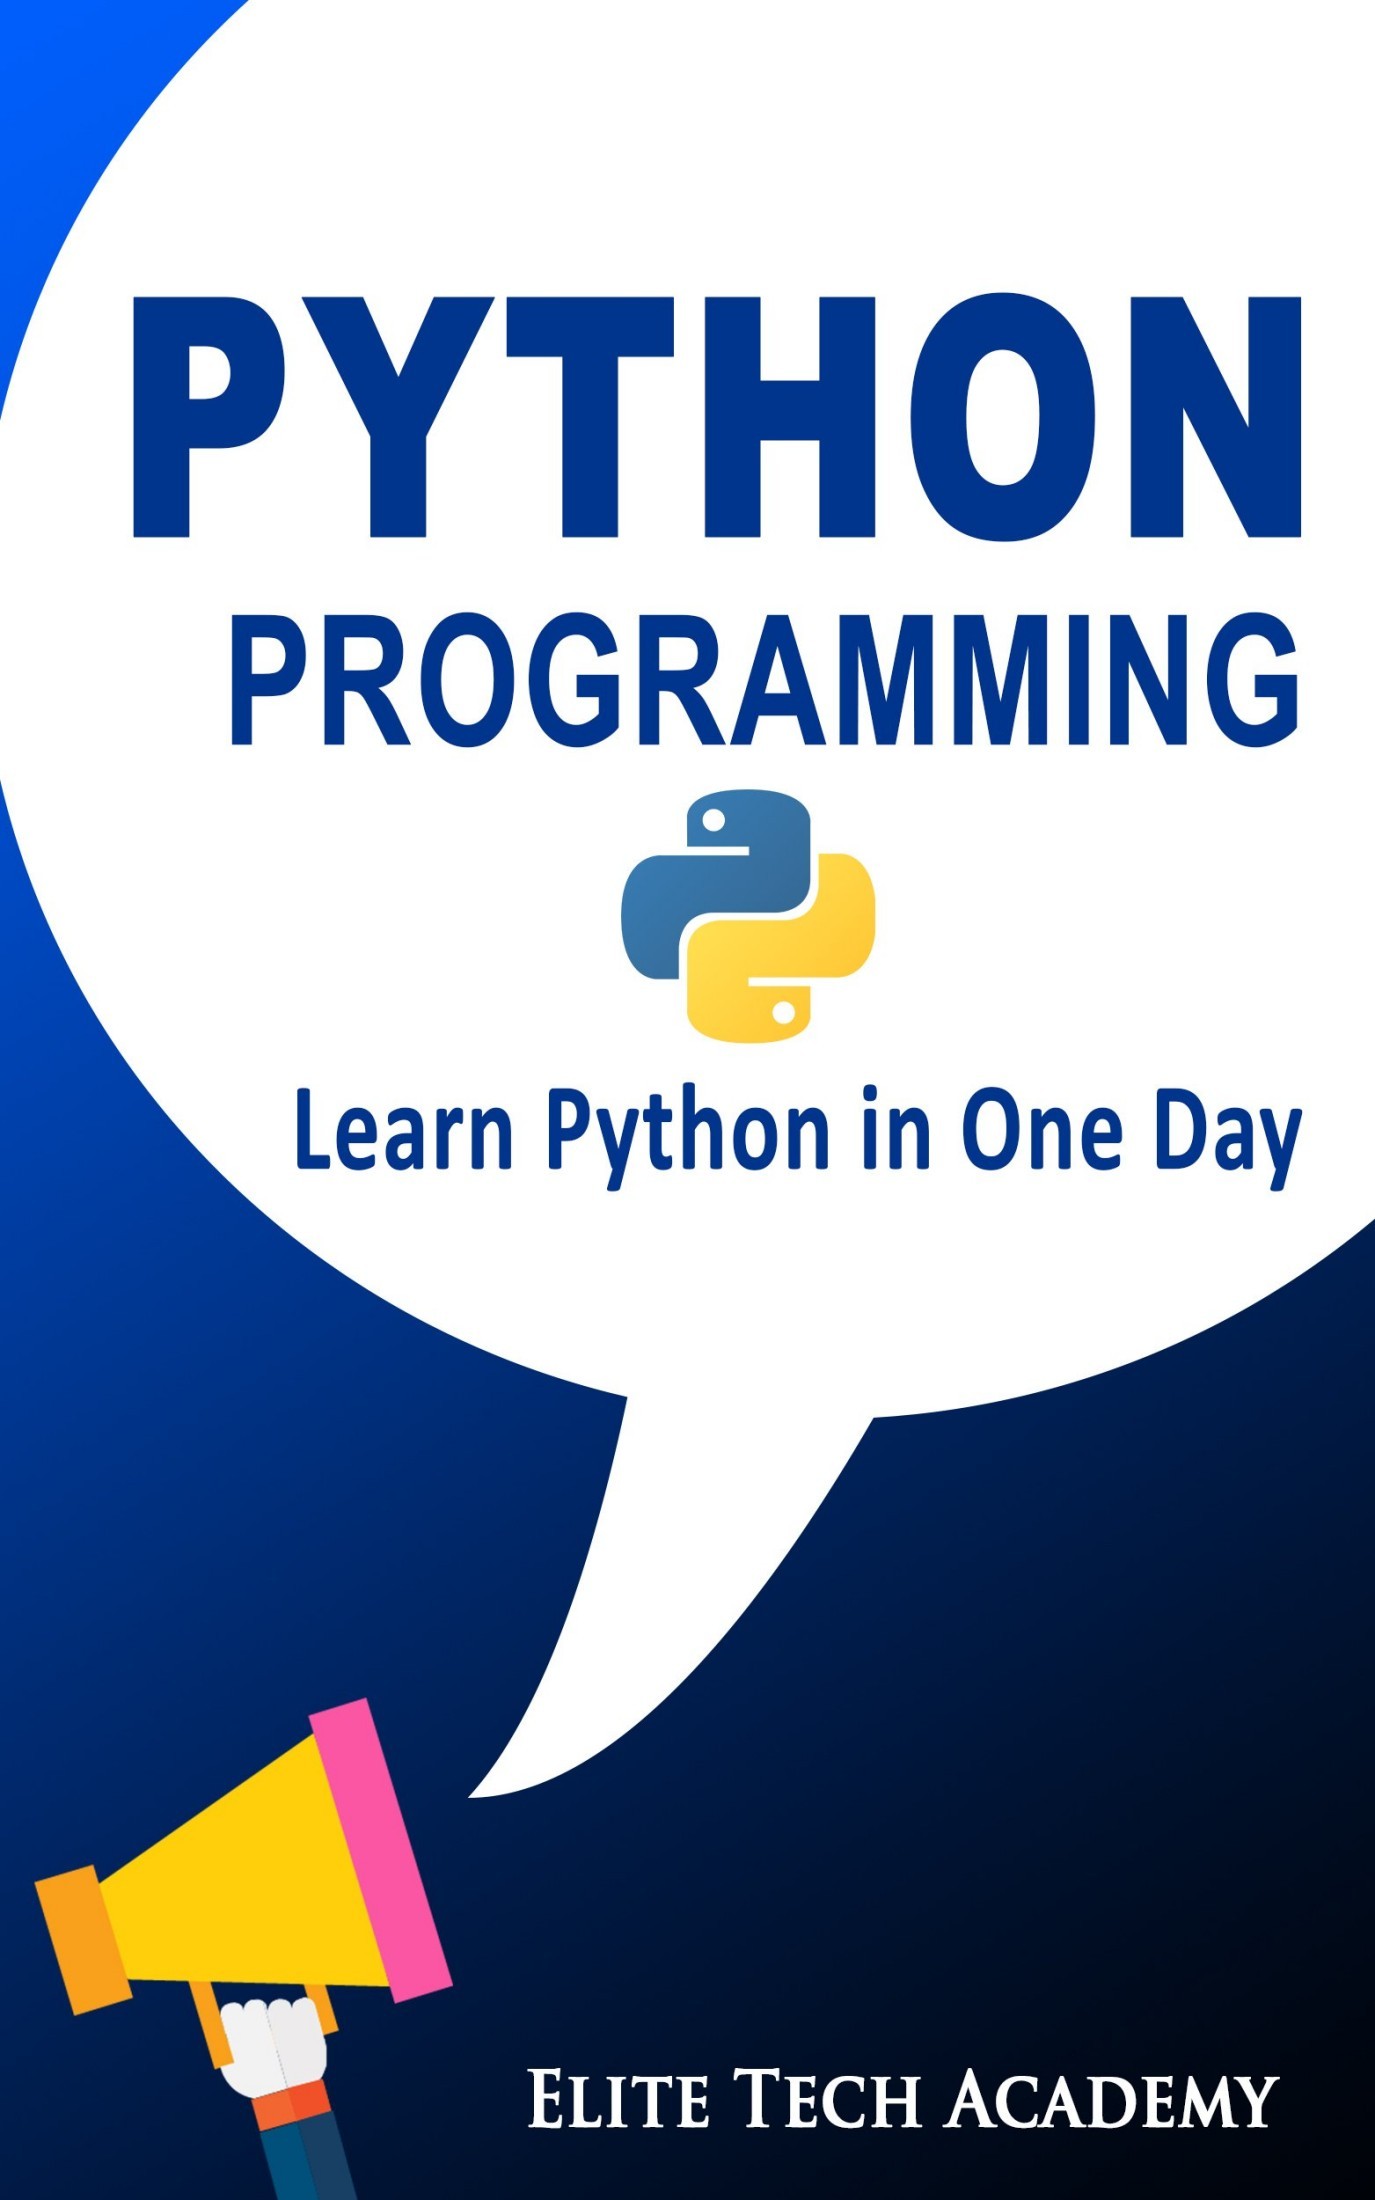 Python Programming for Beginners: Learn Python in One Day (Python, Python for Dummies, Python Crash Course)